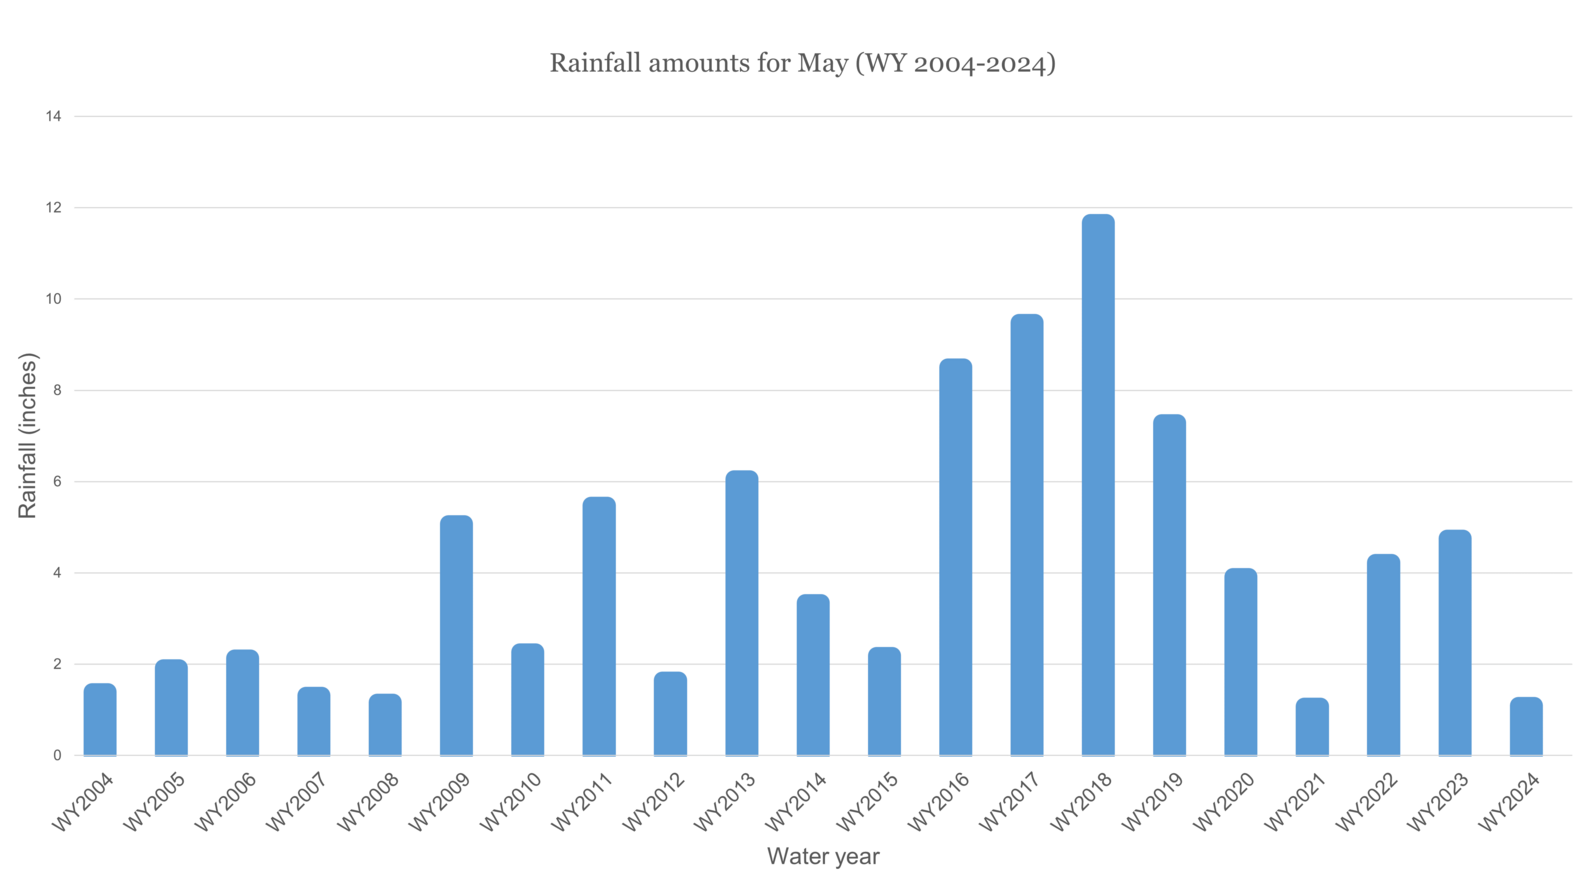 Bar graph showing rainfall amounts for the month of May each year from 2004 through 2024